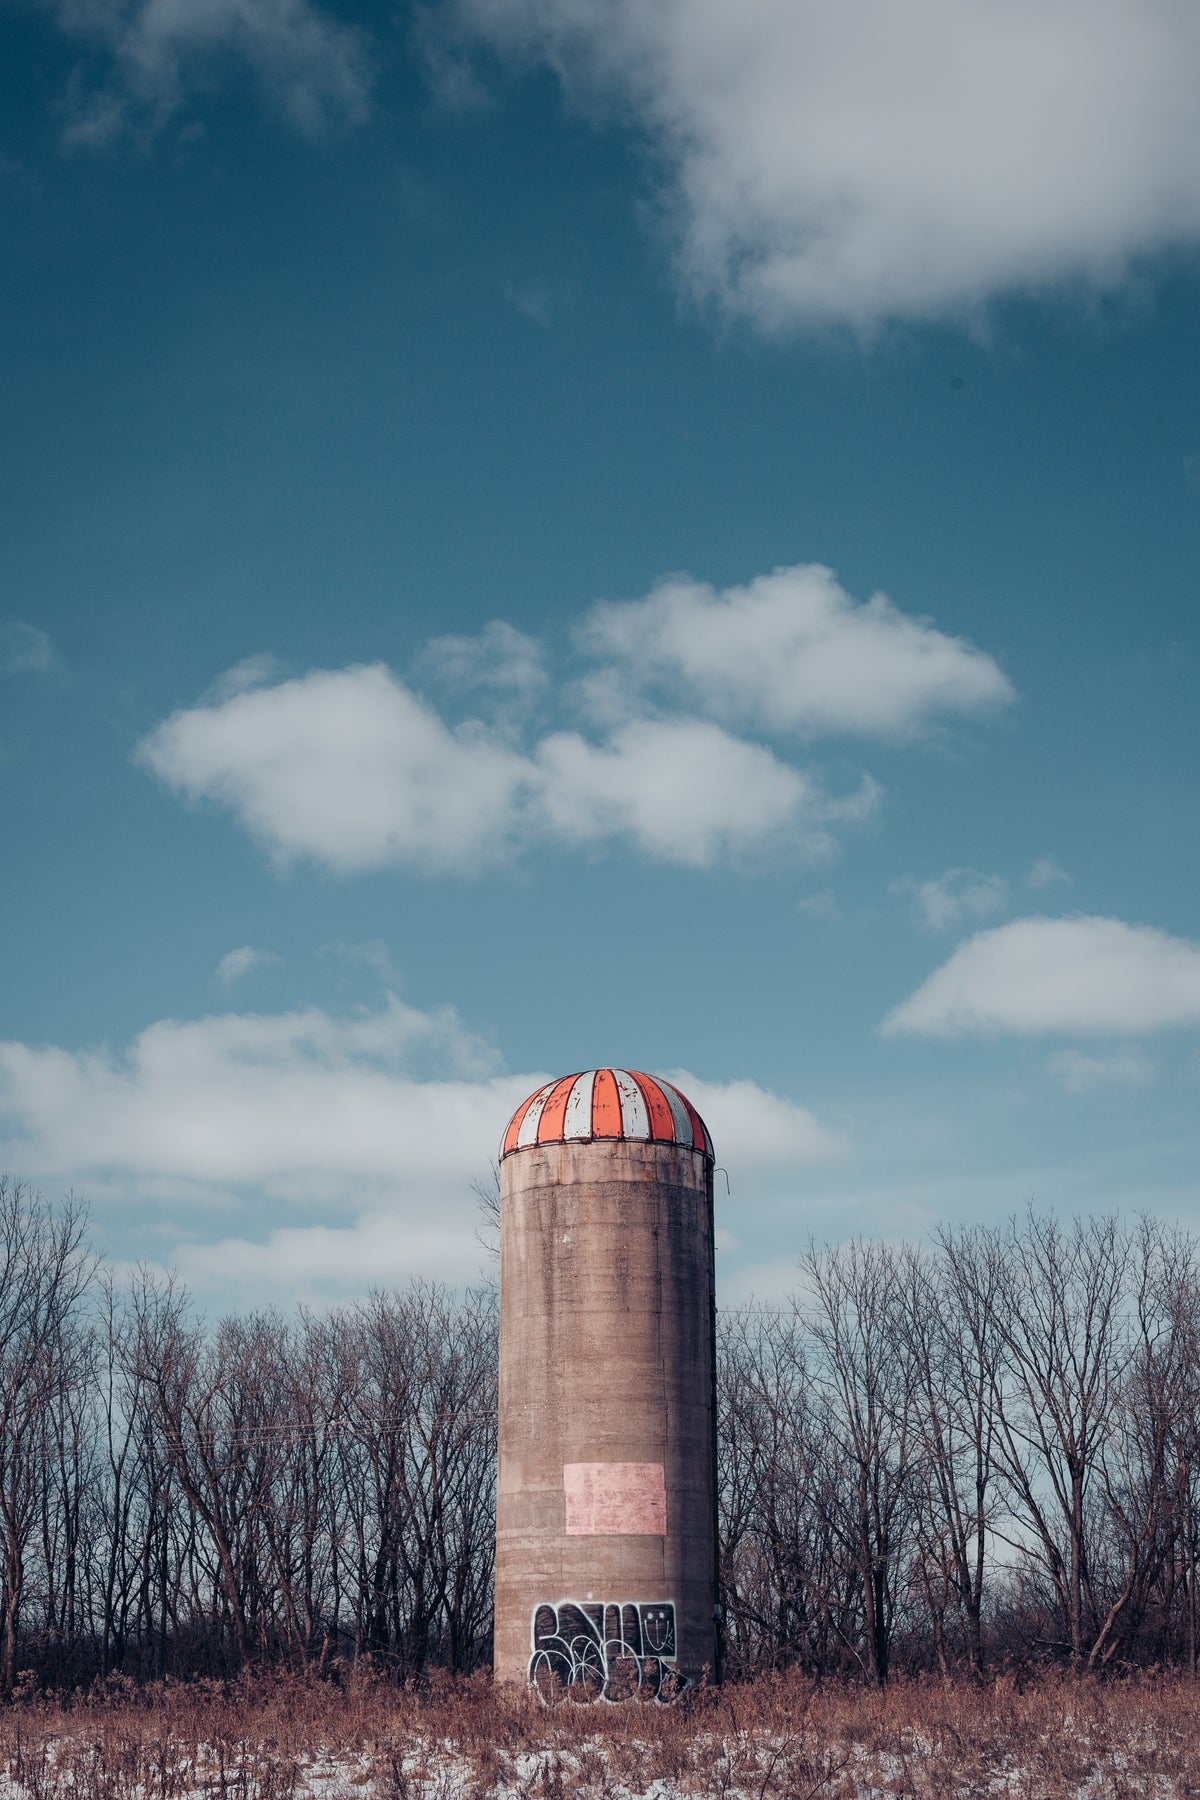 cement farm silo with red and white striped roof